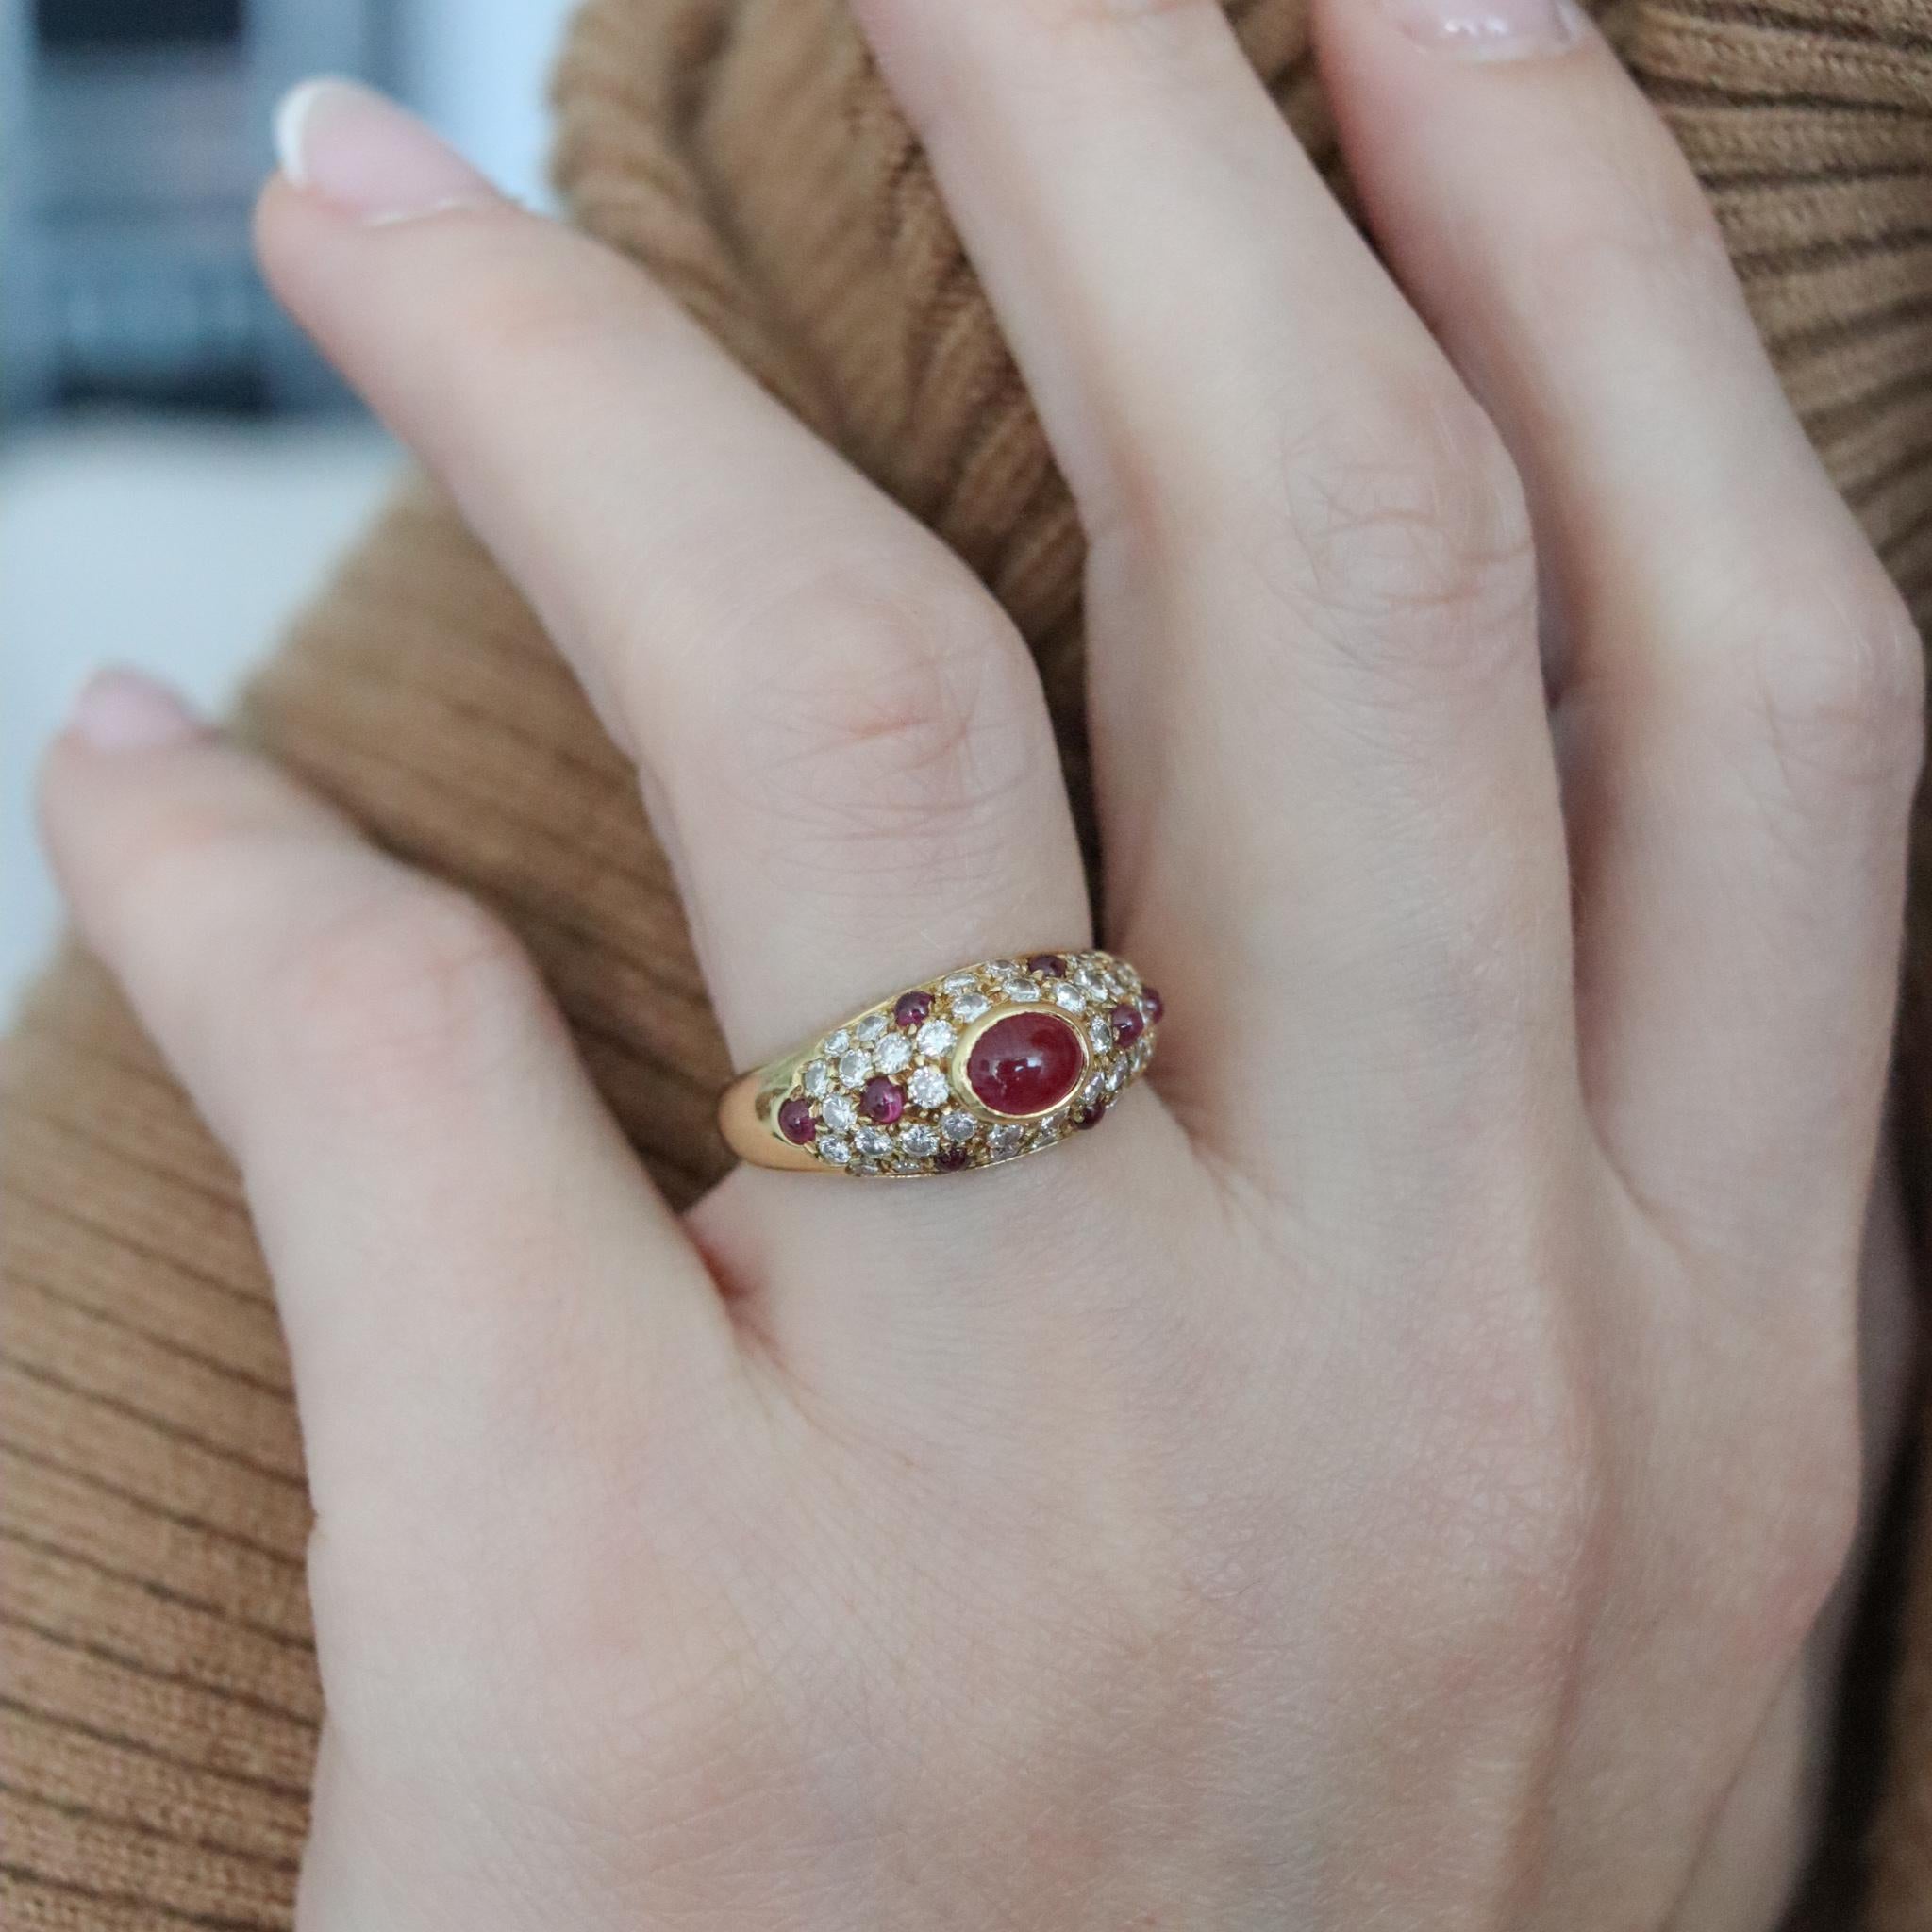 Women's Cartier Paris 1970 Corinth Ring in 18kt Gold with 2.83ctw in Diamonds & Rubies For Sale